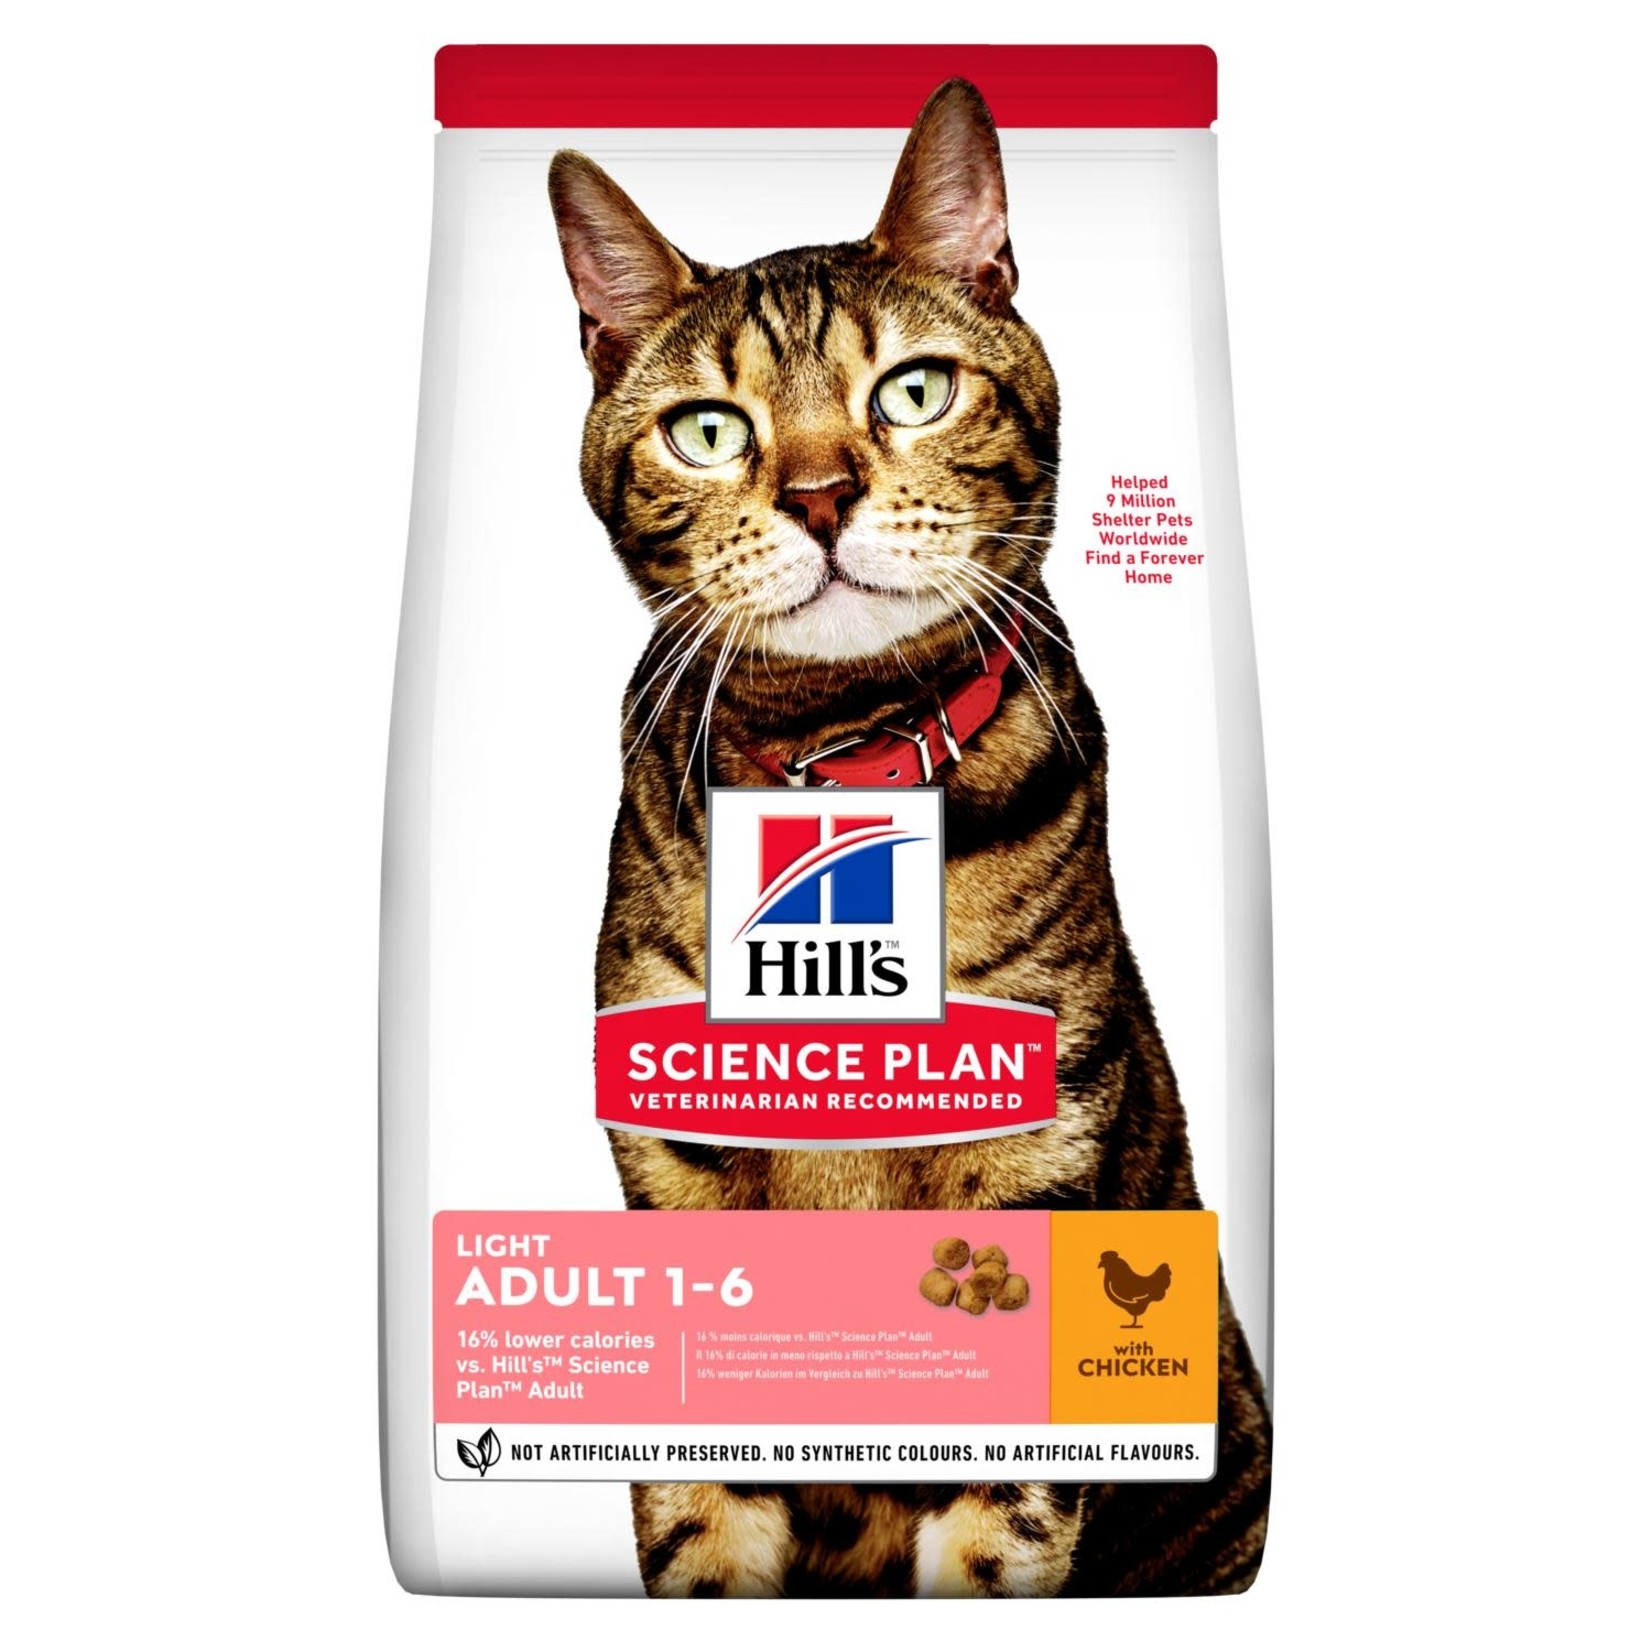 Hill's Science Plan Light Adult 1-6 Cat Dry Food, Chicken